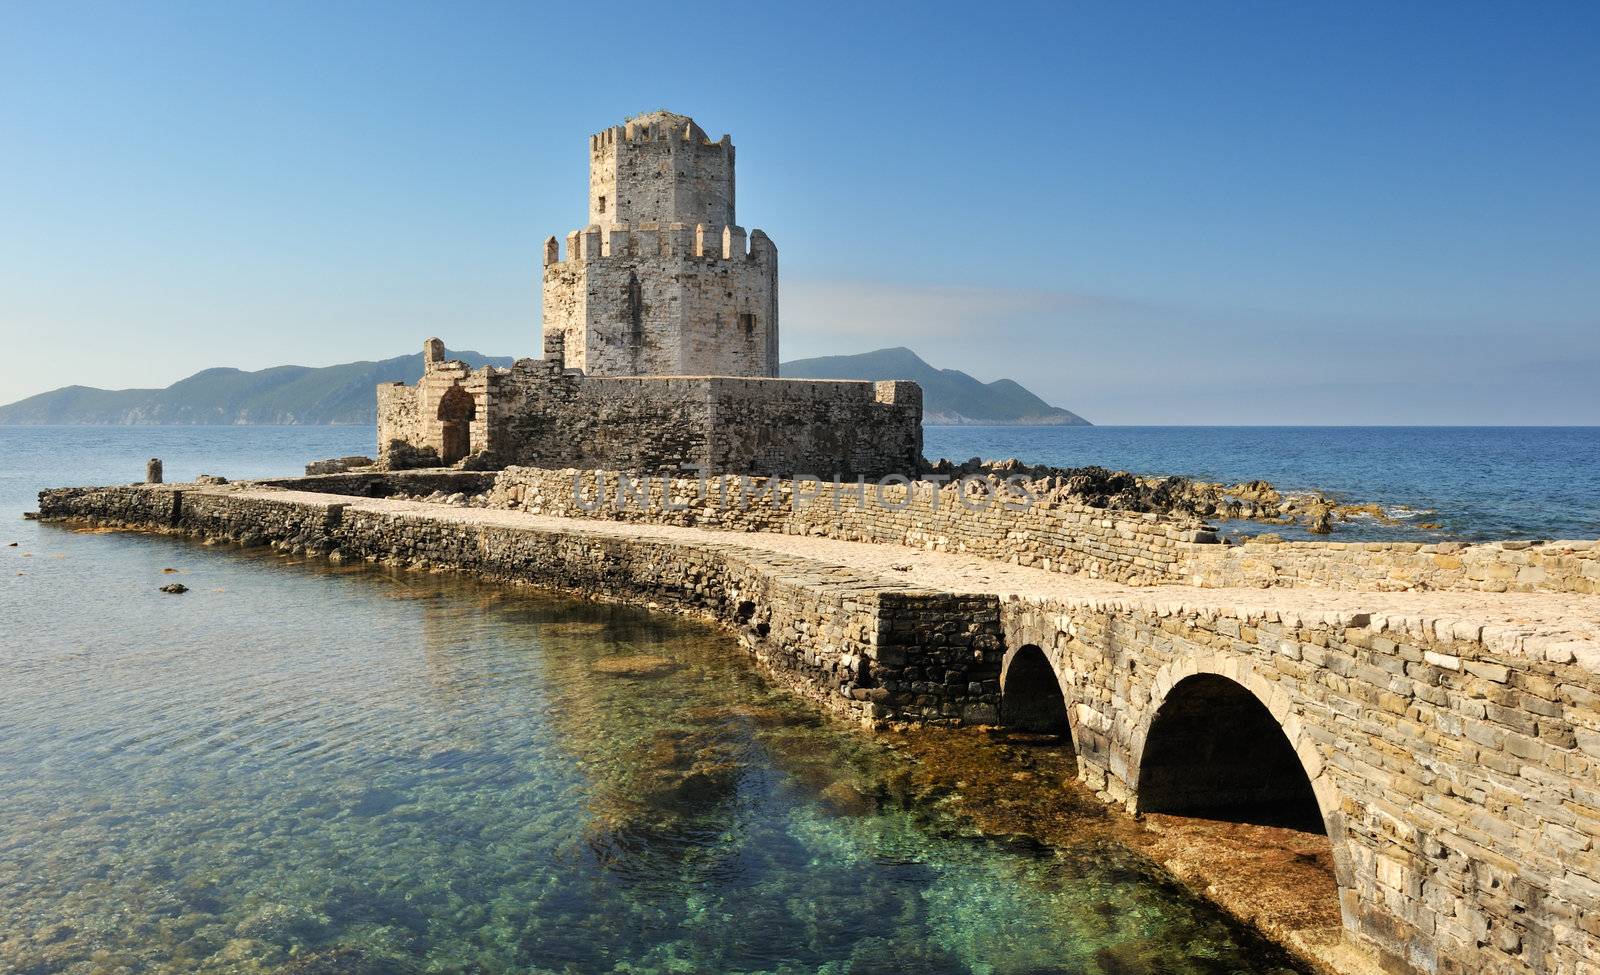 The watchtower of the medieval castle of Methoni, southern Greec by akarelias